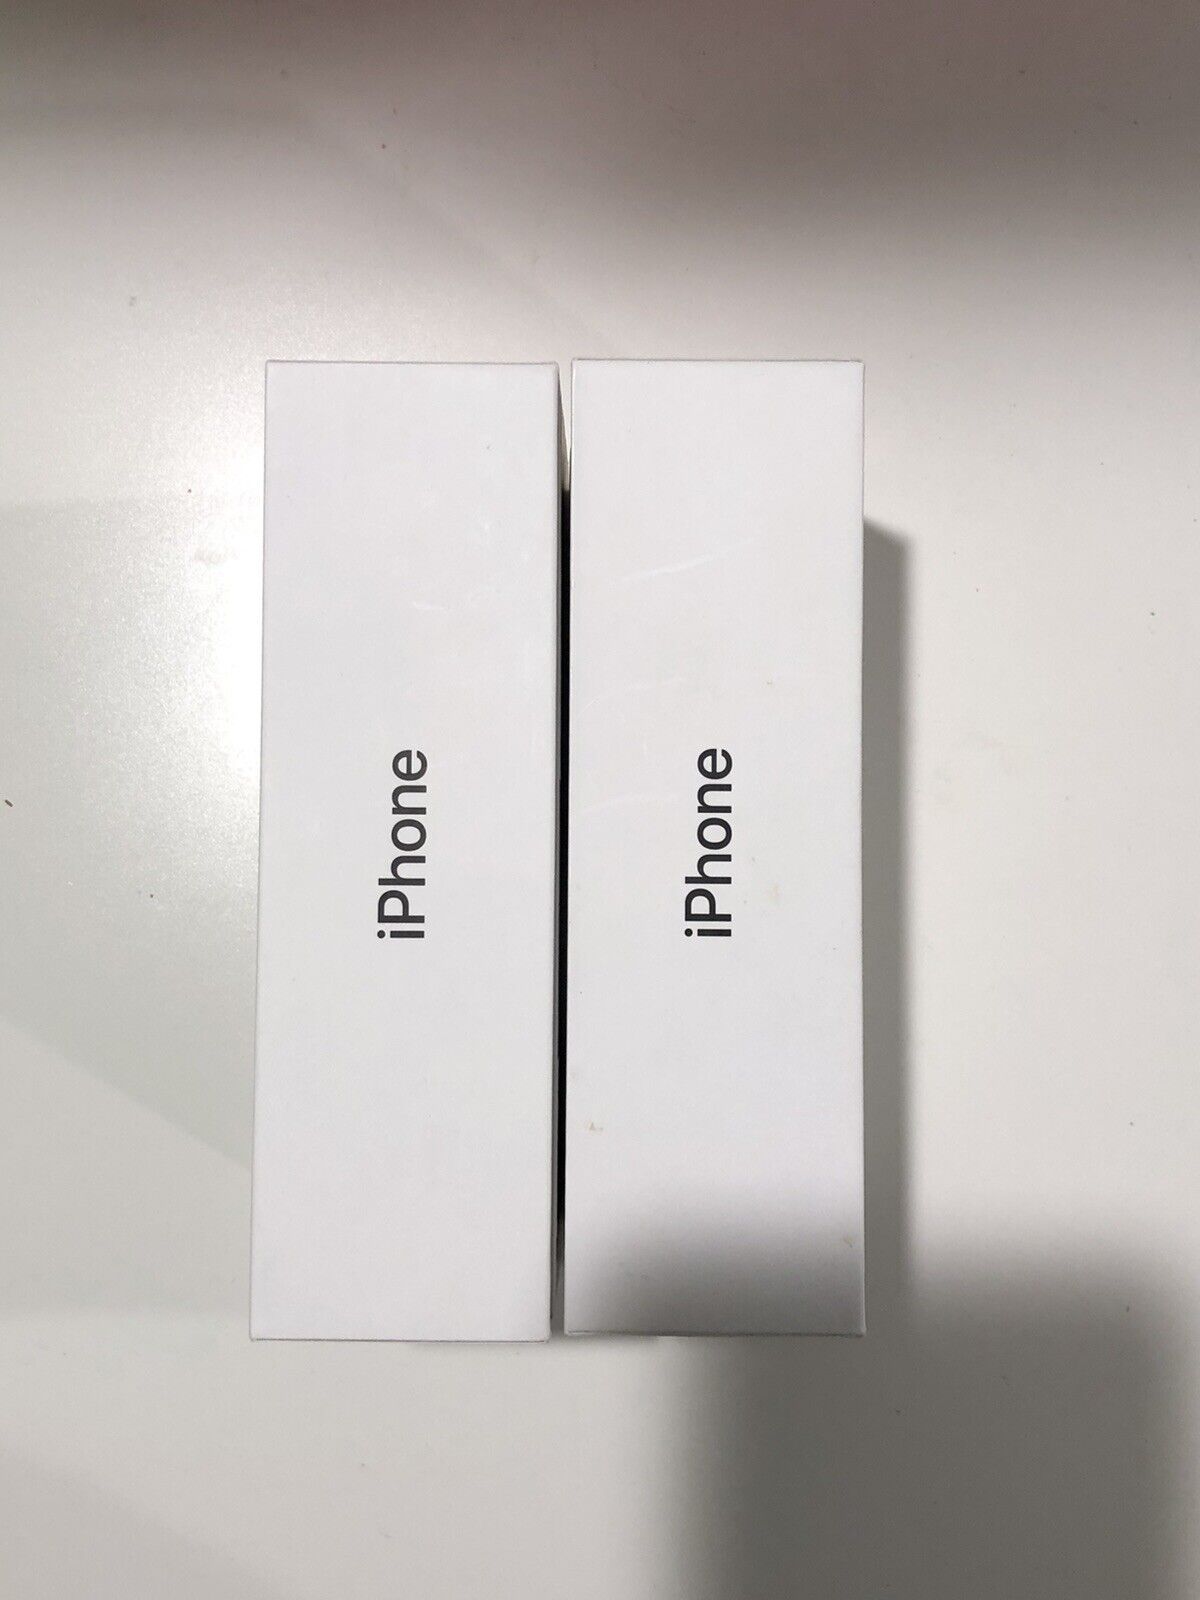 Lot of 2 iPhone Xs Boxes ONLY, Space Gray Color Apple - фотография #3